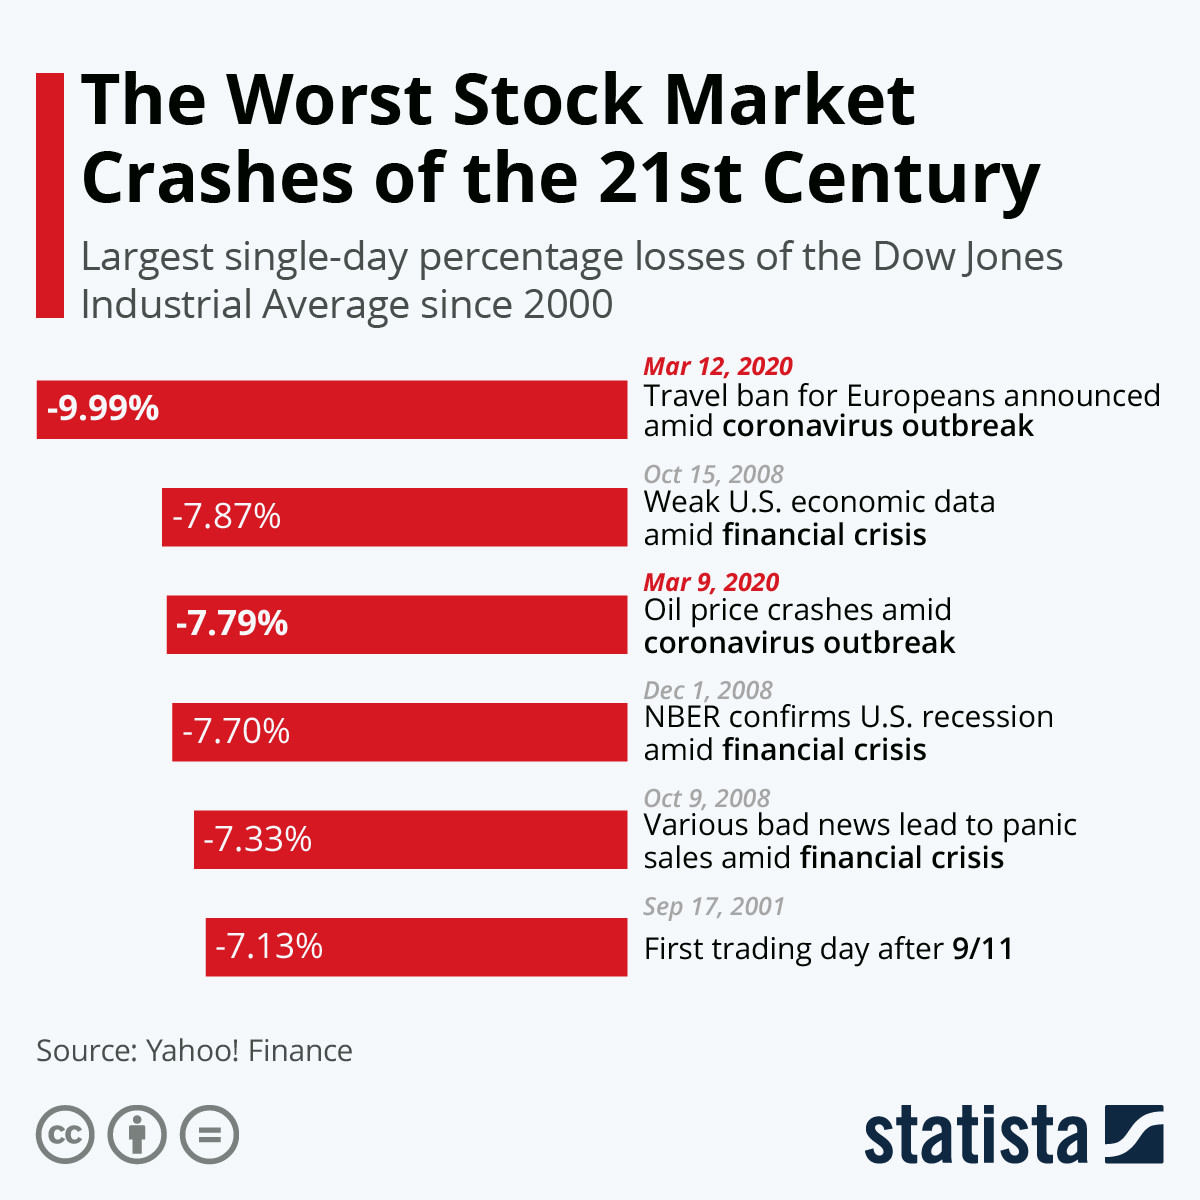 The Worst Stock Market Crashes - NOT A LEAD